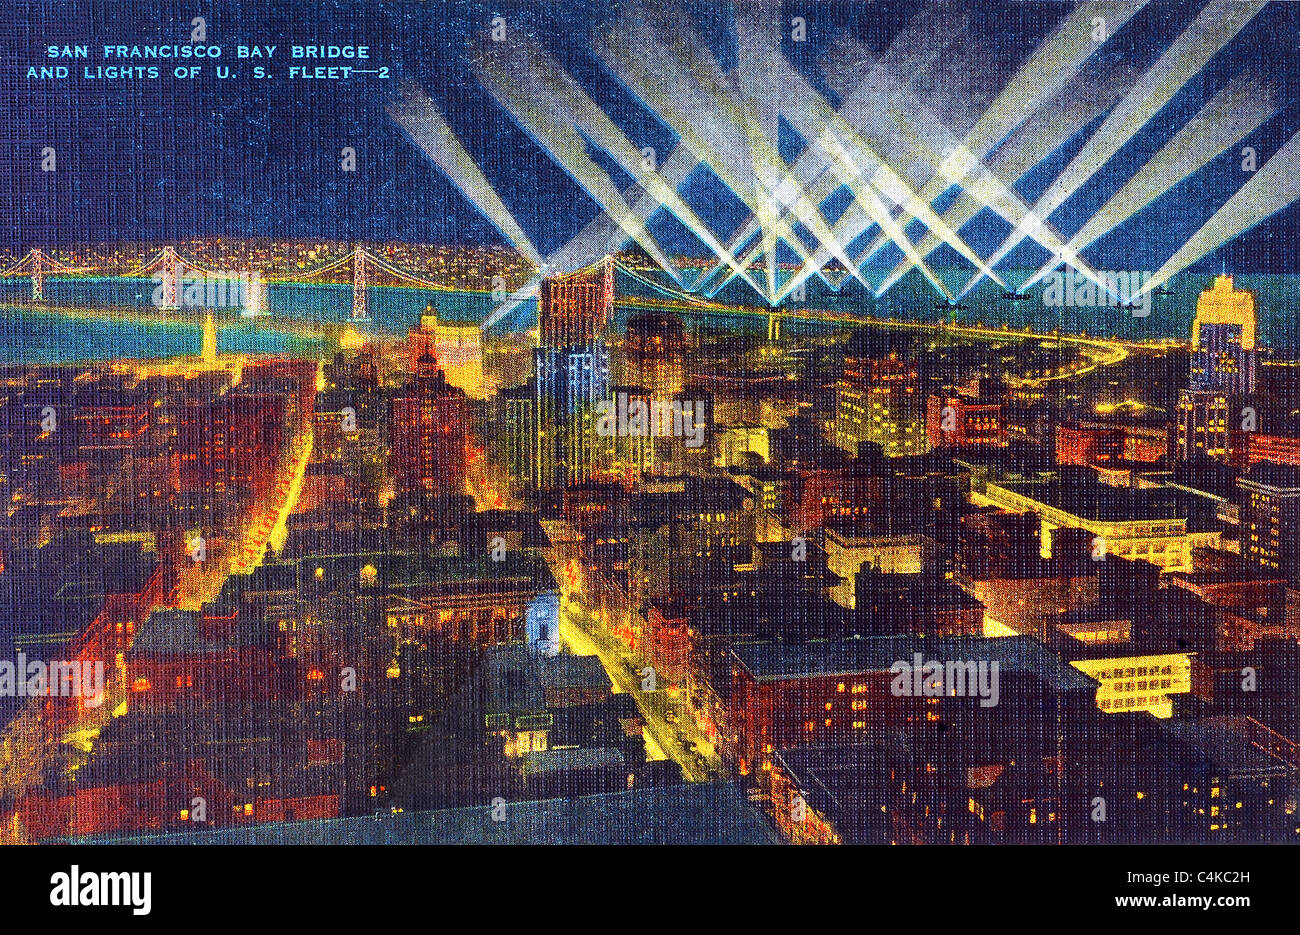 San Francisco with the Bay Bridge and lights of the US Naval Fleet in the background from an authentic 1940s postcard Stock Photo